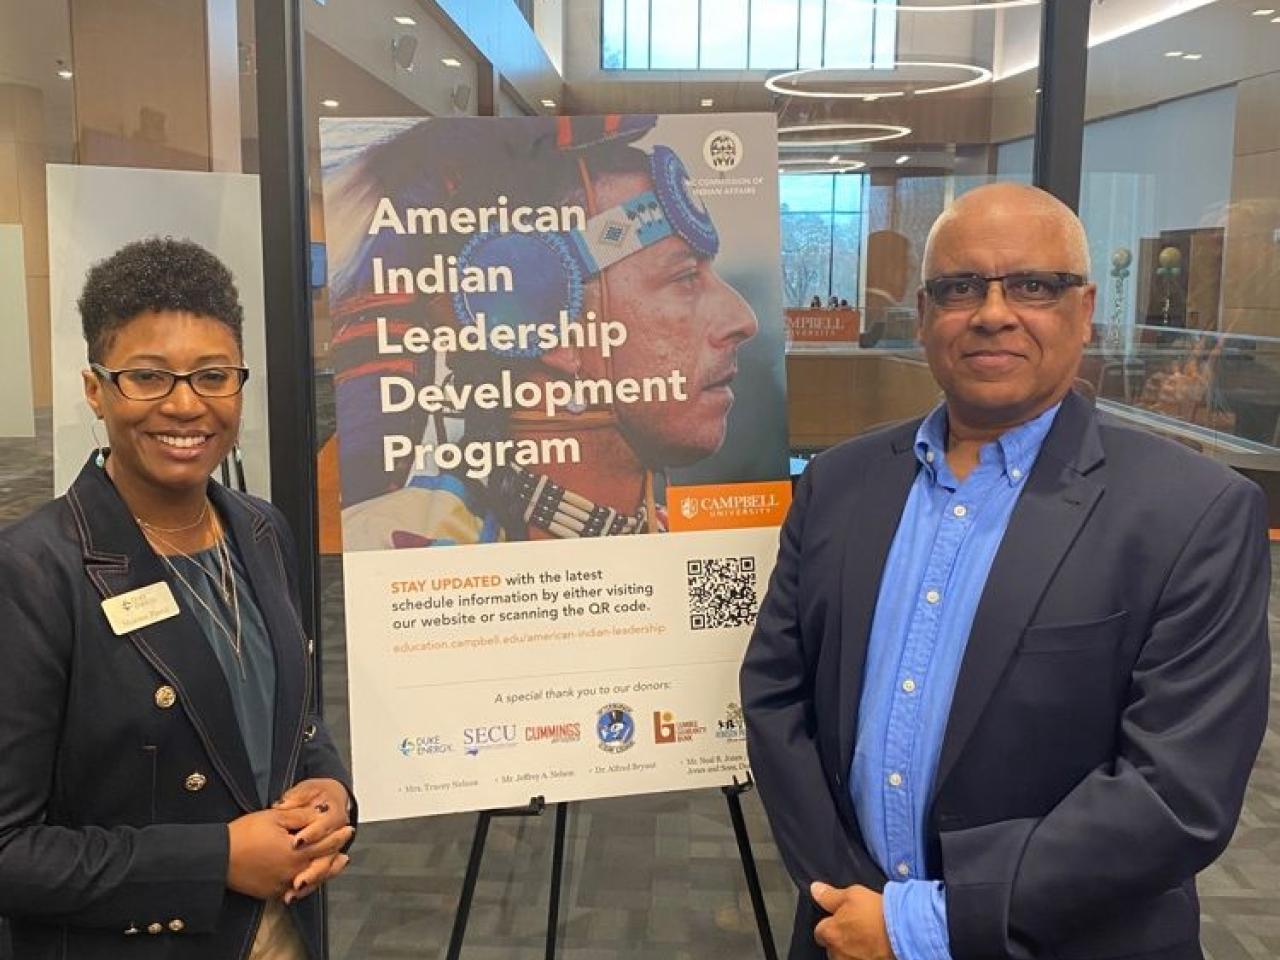 Two people stand beside a poster "American Indian Leadership Development Program."